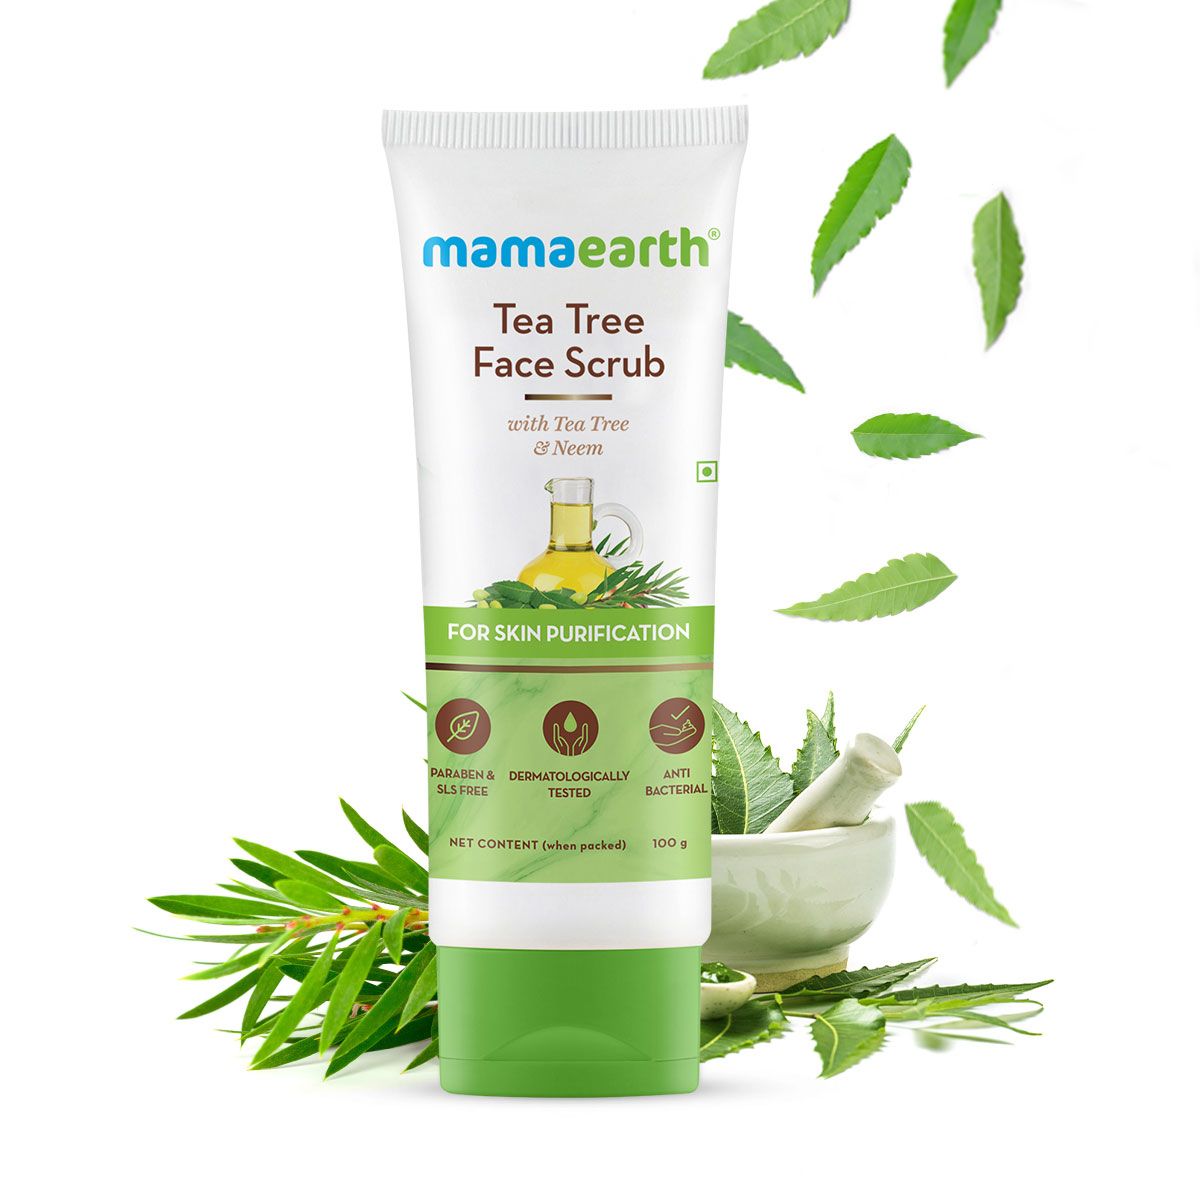 Mamaearth Tea Tree Face Scrub Better Than Others Available in The Market